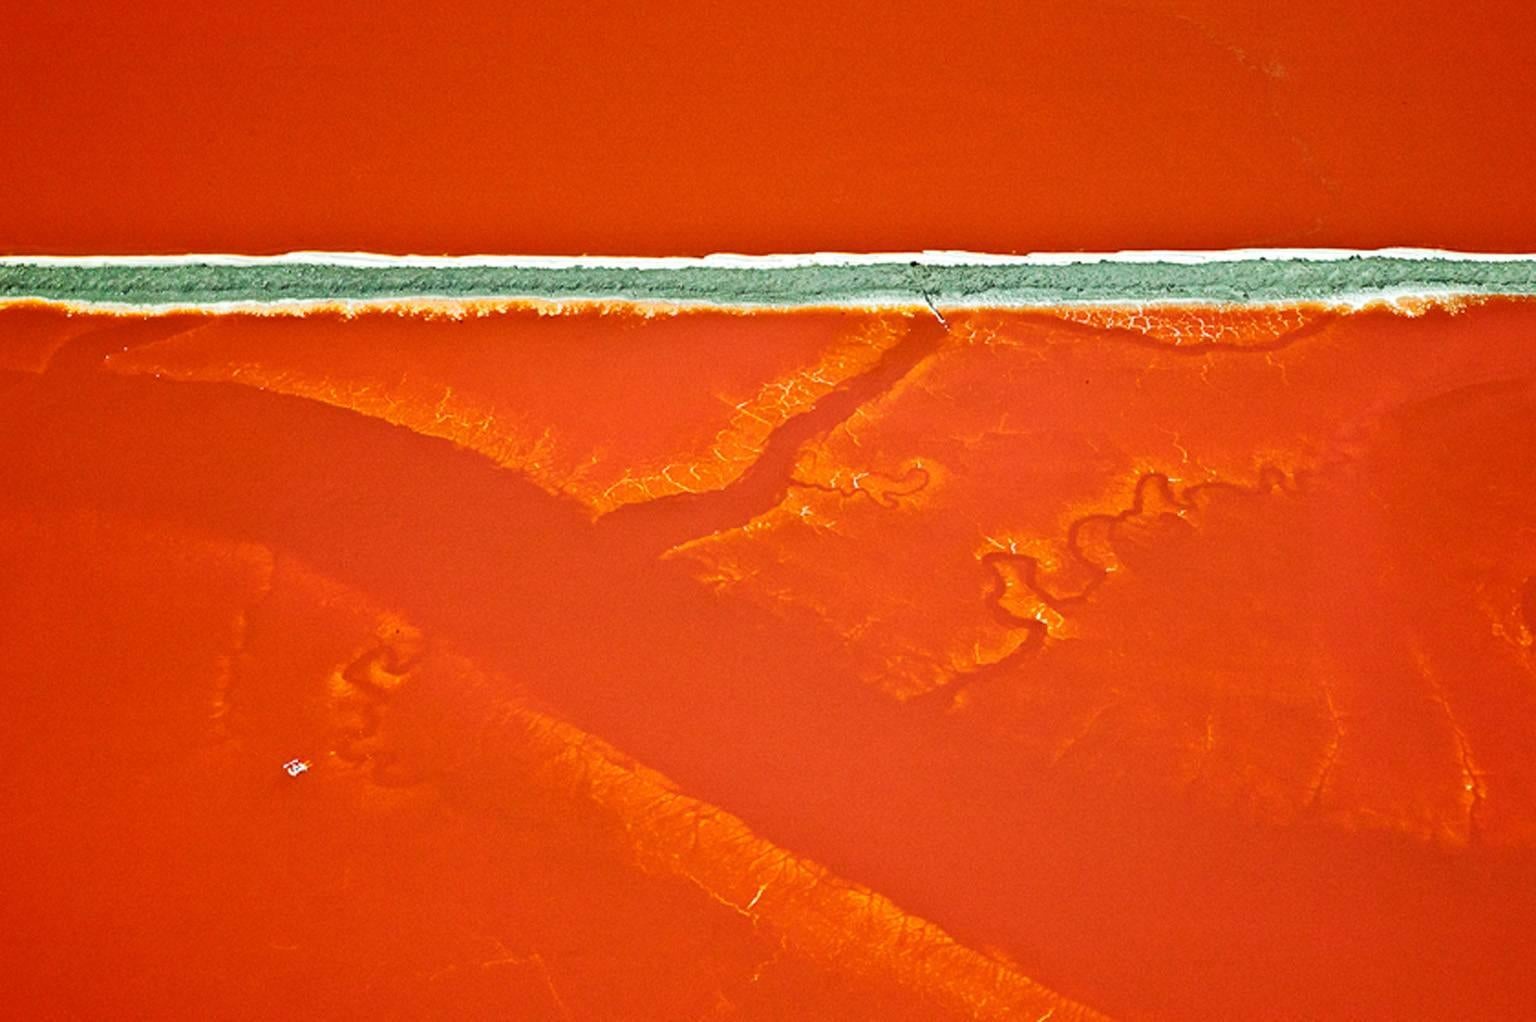 Colin McRae Abstract Photograph - Red Creek 3